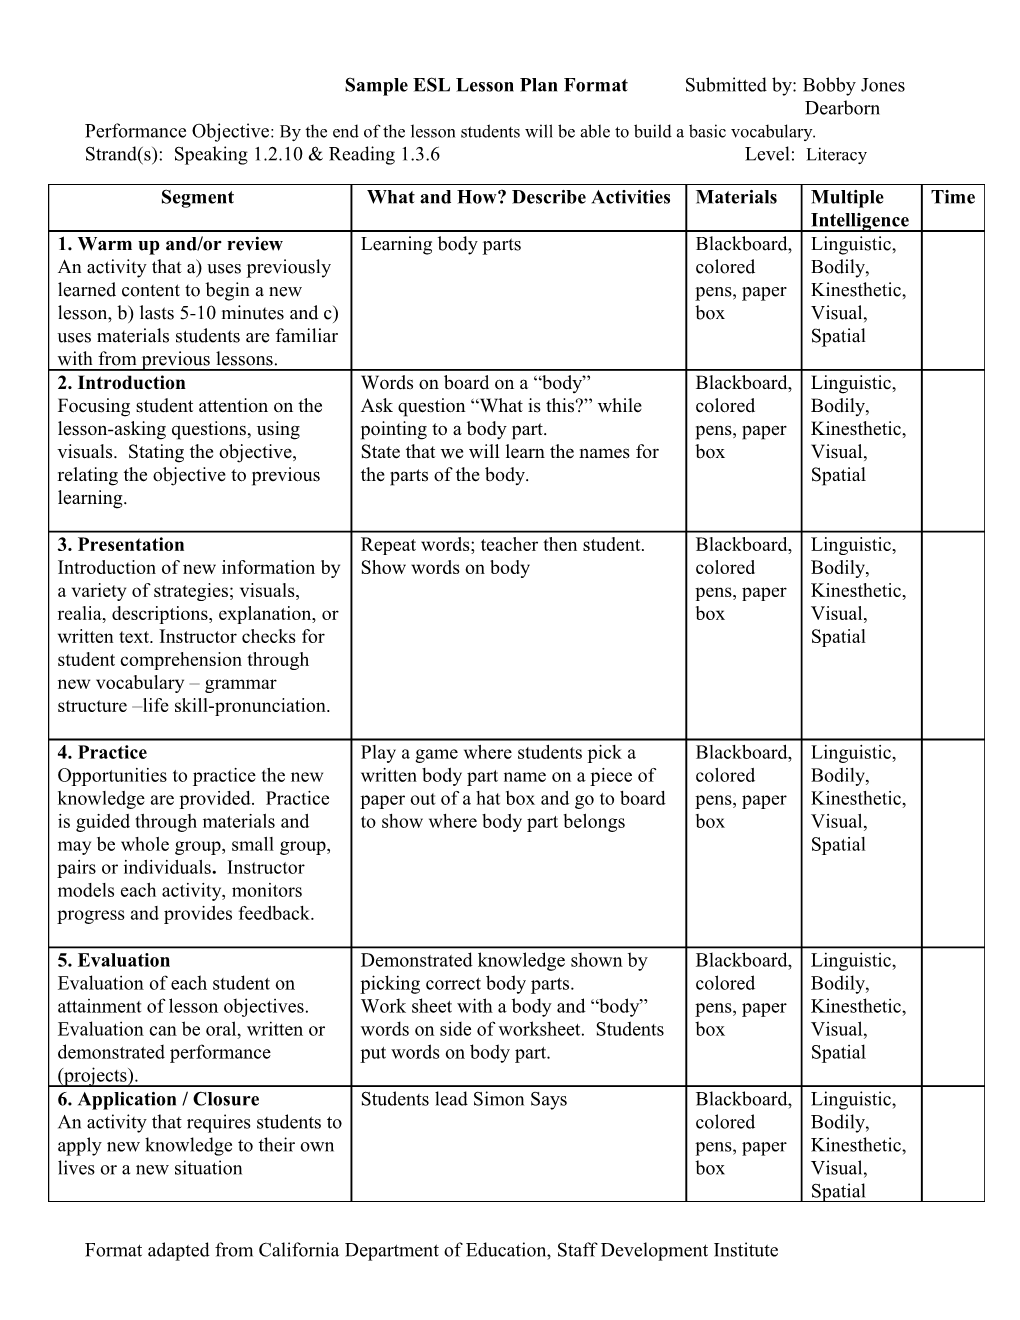 Sample ESL Lesson Plan Format Submitted By: Bobby Jones